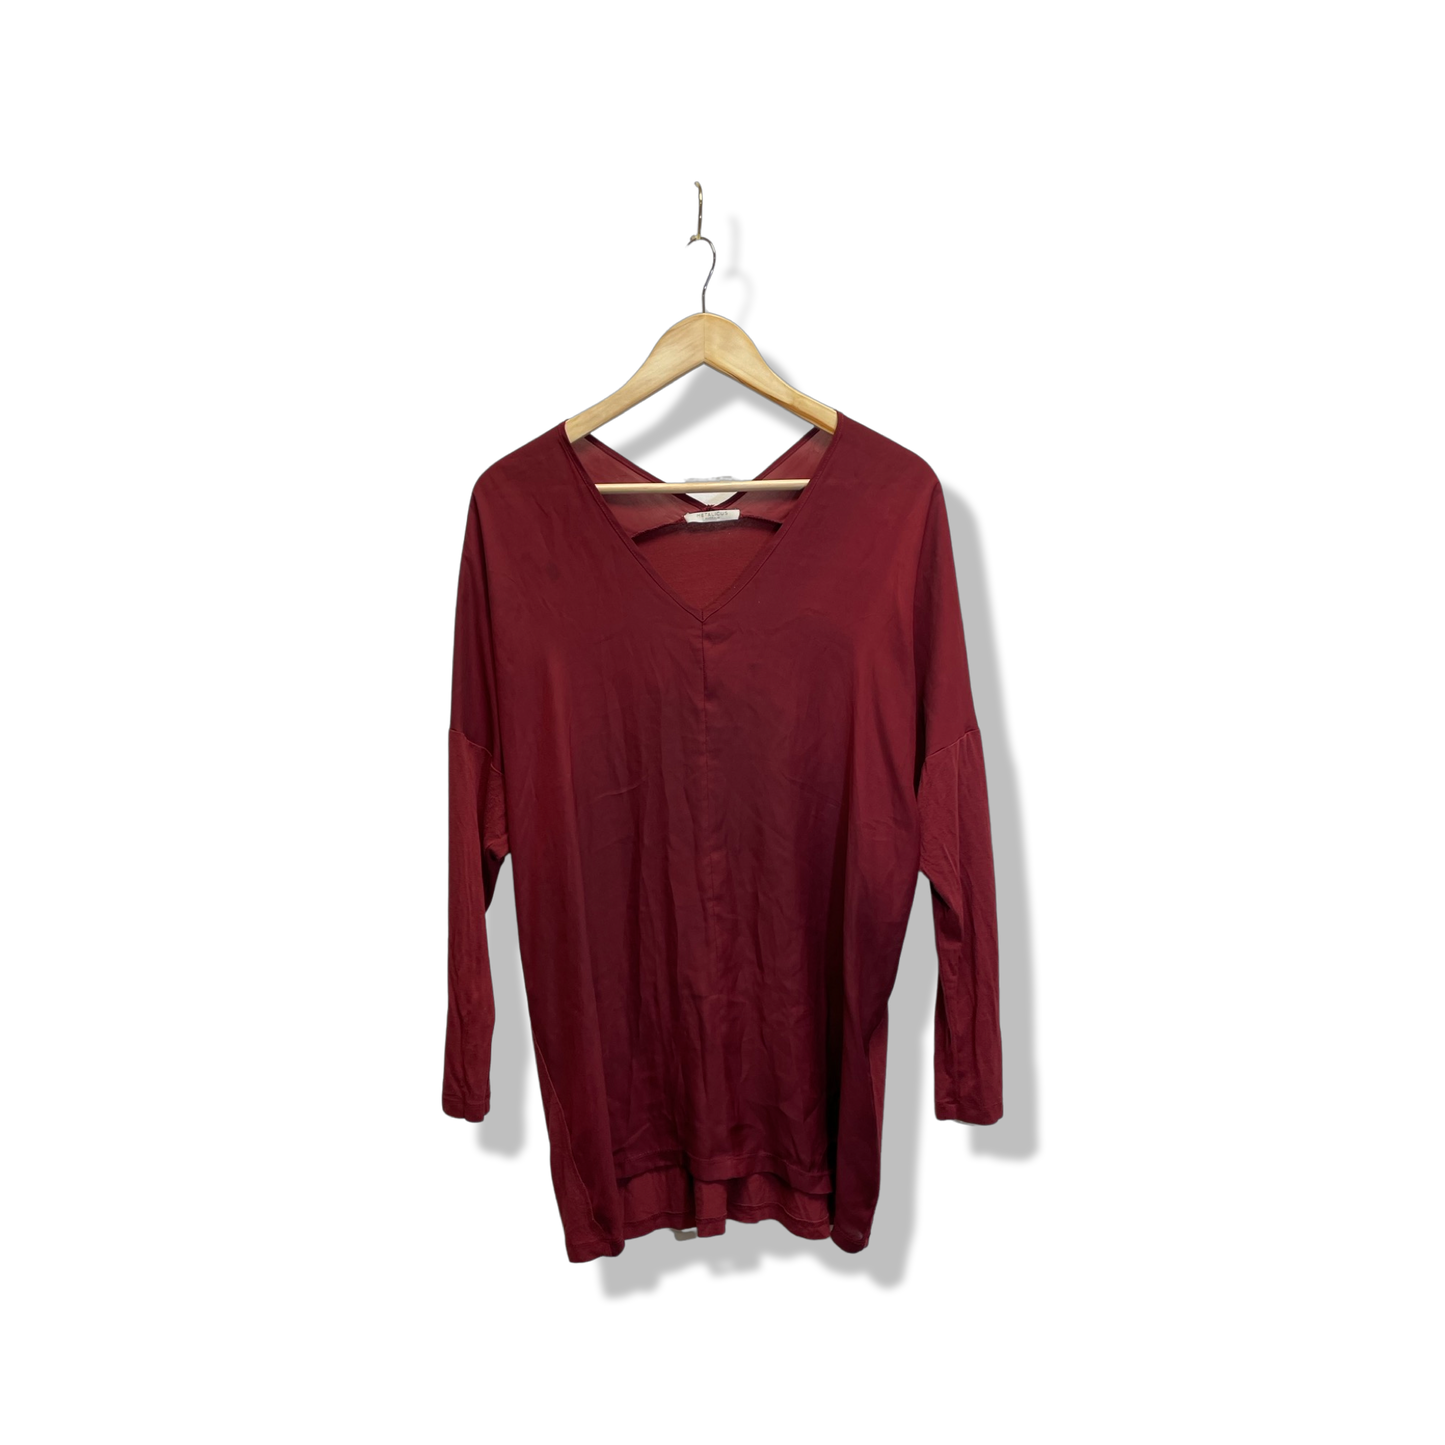 One Size - Long Sleeve Top